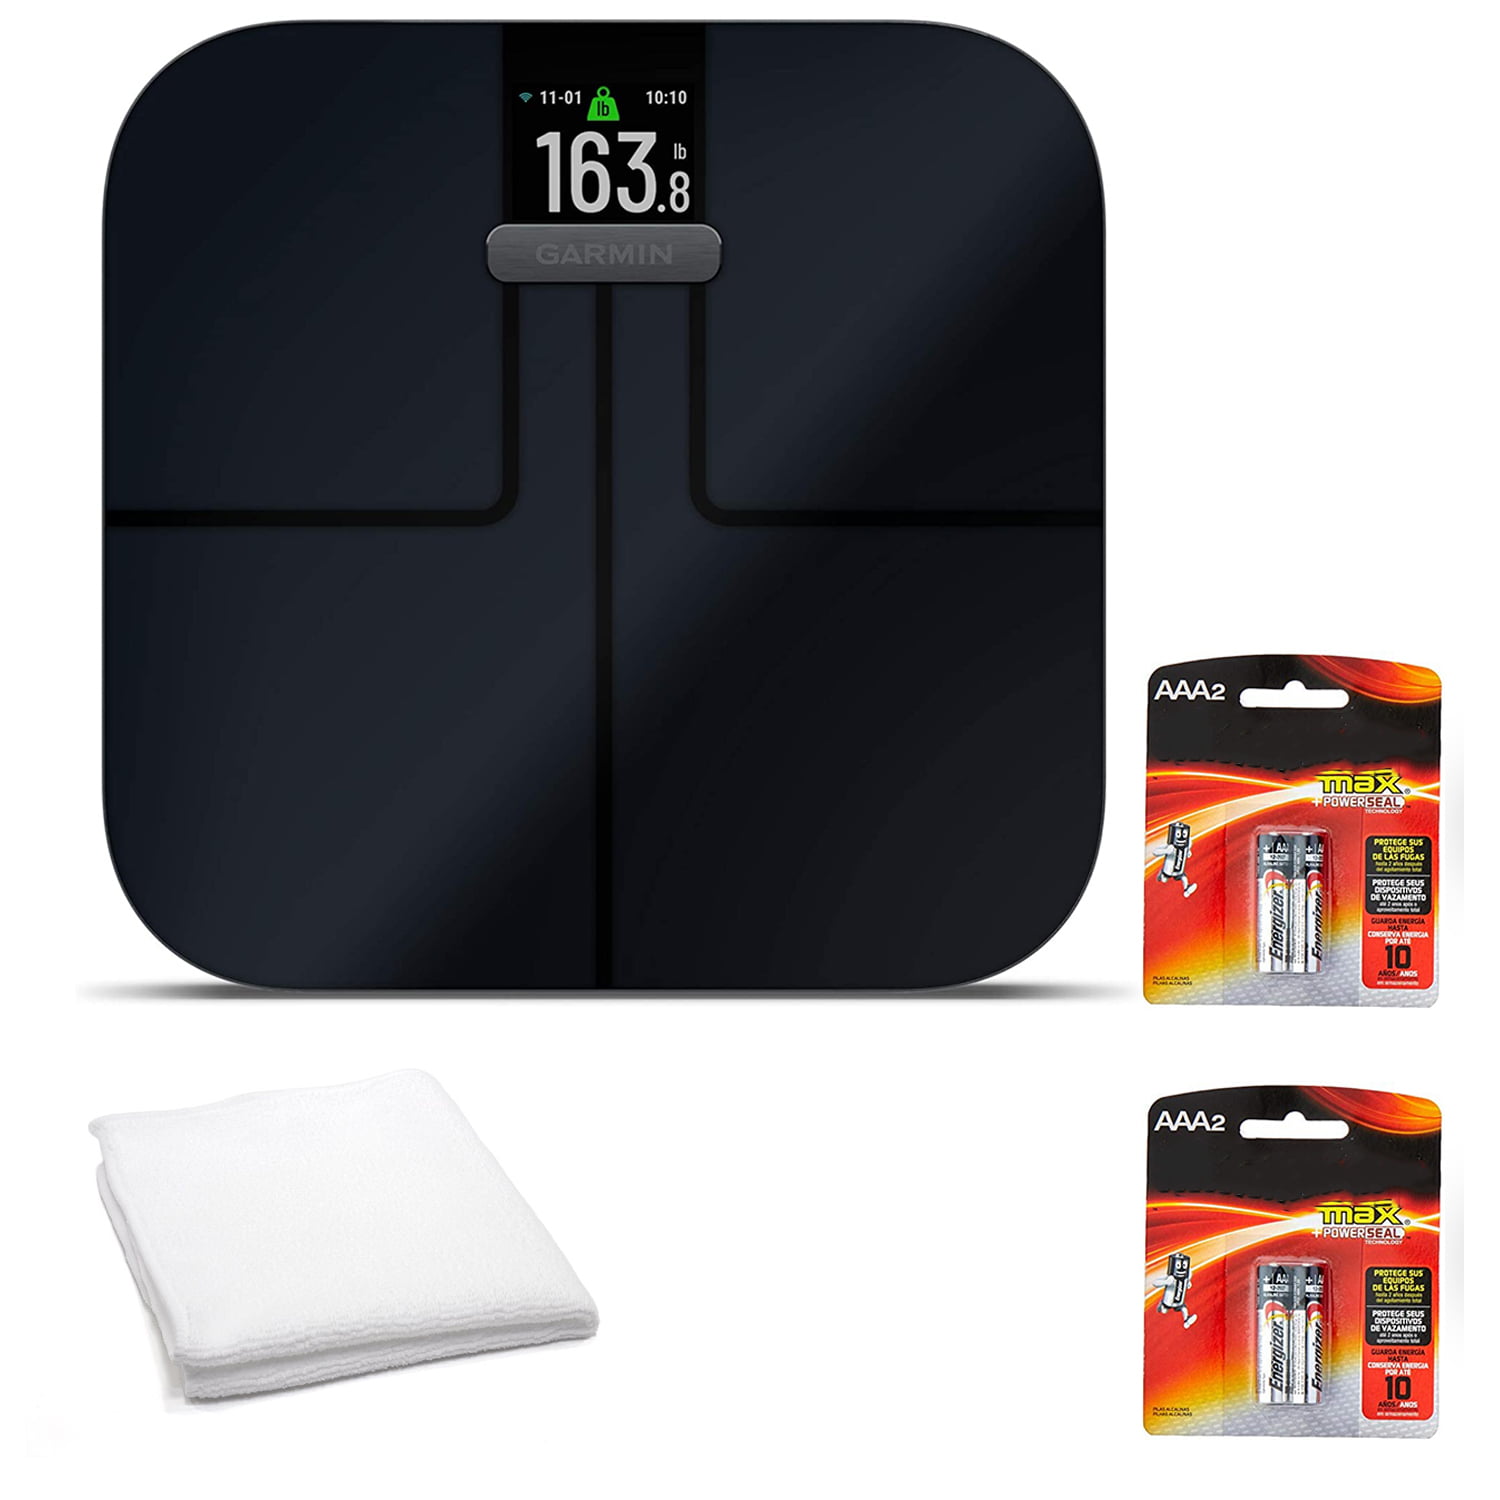 Garmin Index S2, Smart Scale with Wireless Connectivity, Measure Body Fat,  Muscle, Bone Mass, Body Water and More-Black (Bundle) 